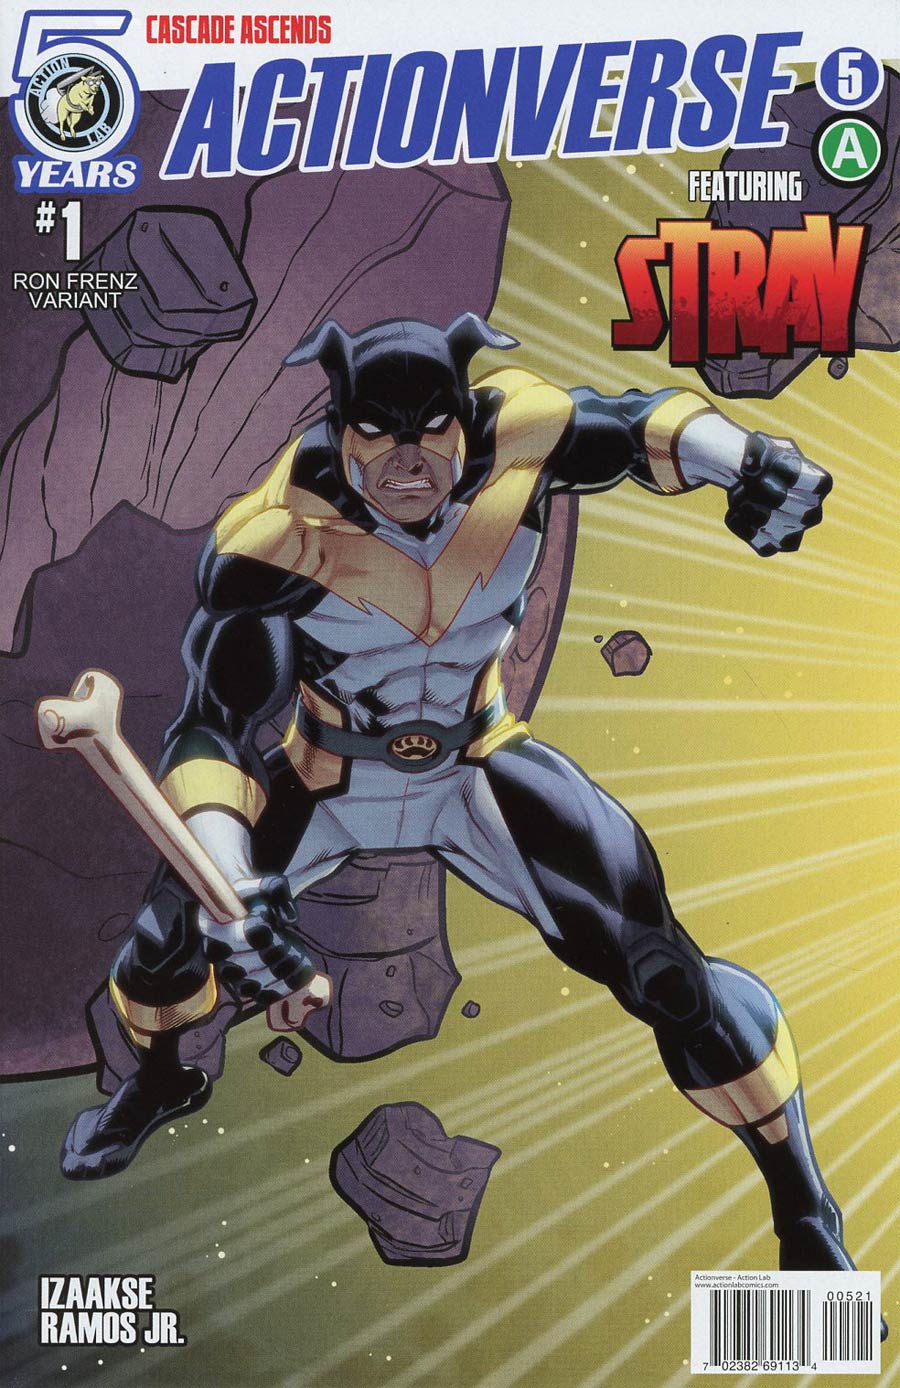 Actionverse #5 Featuring Stray Cover B Variant Ron Frenz Connecting Cover